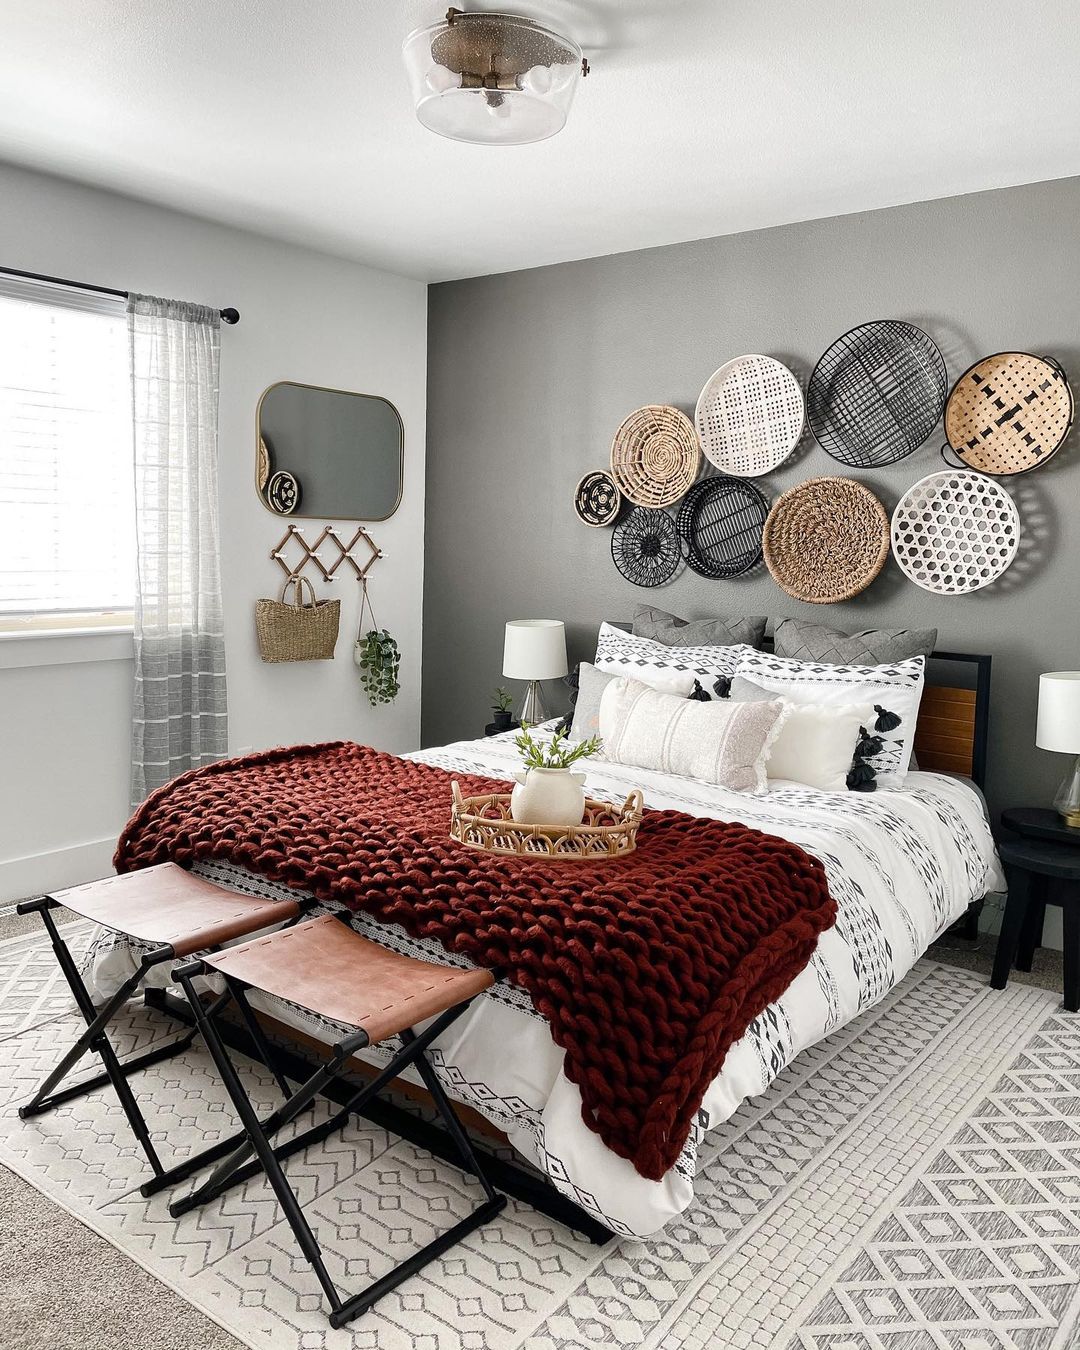 Cozy bedroom with gray accent wall and boho baskets hung on wall. Photo by Instagram User @meaganmarquisliving